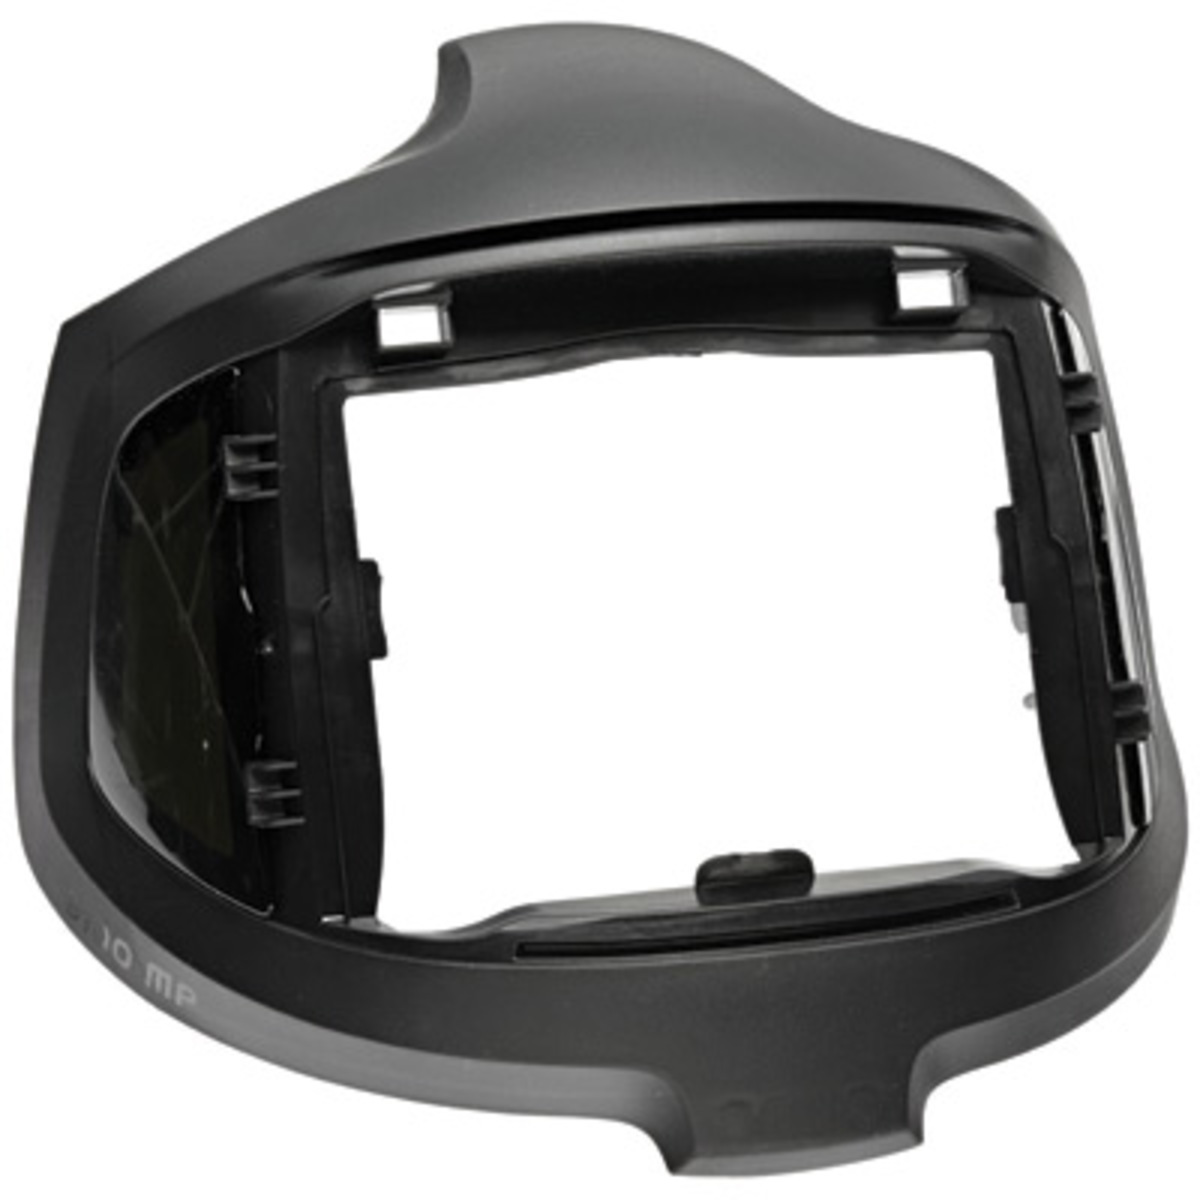 3M Speedglas Outside Cover Plate For 9100 MP